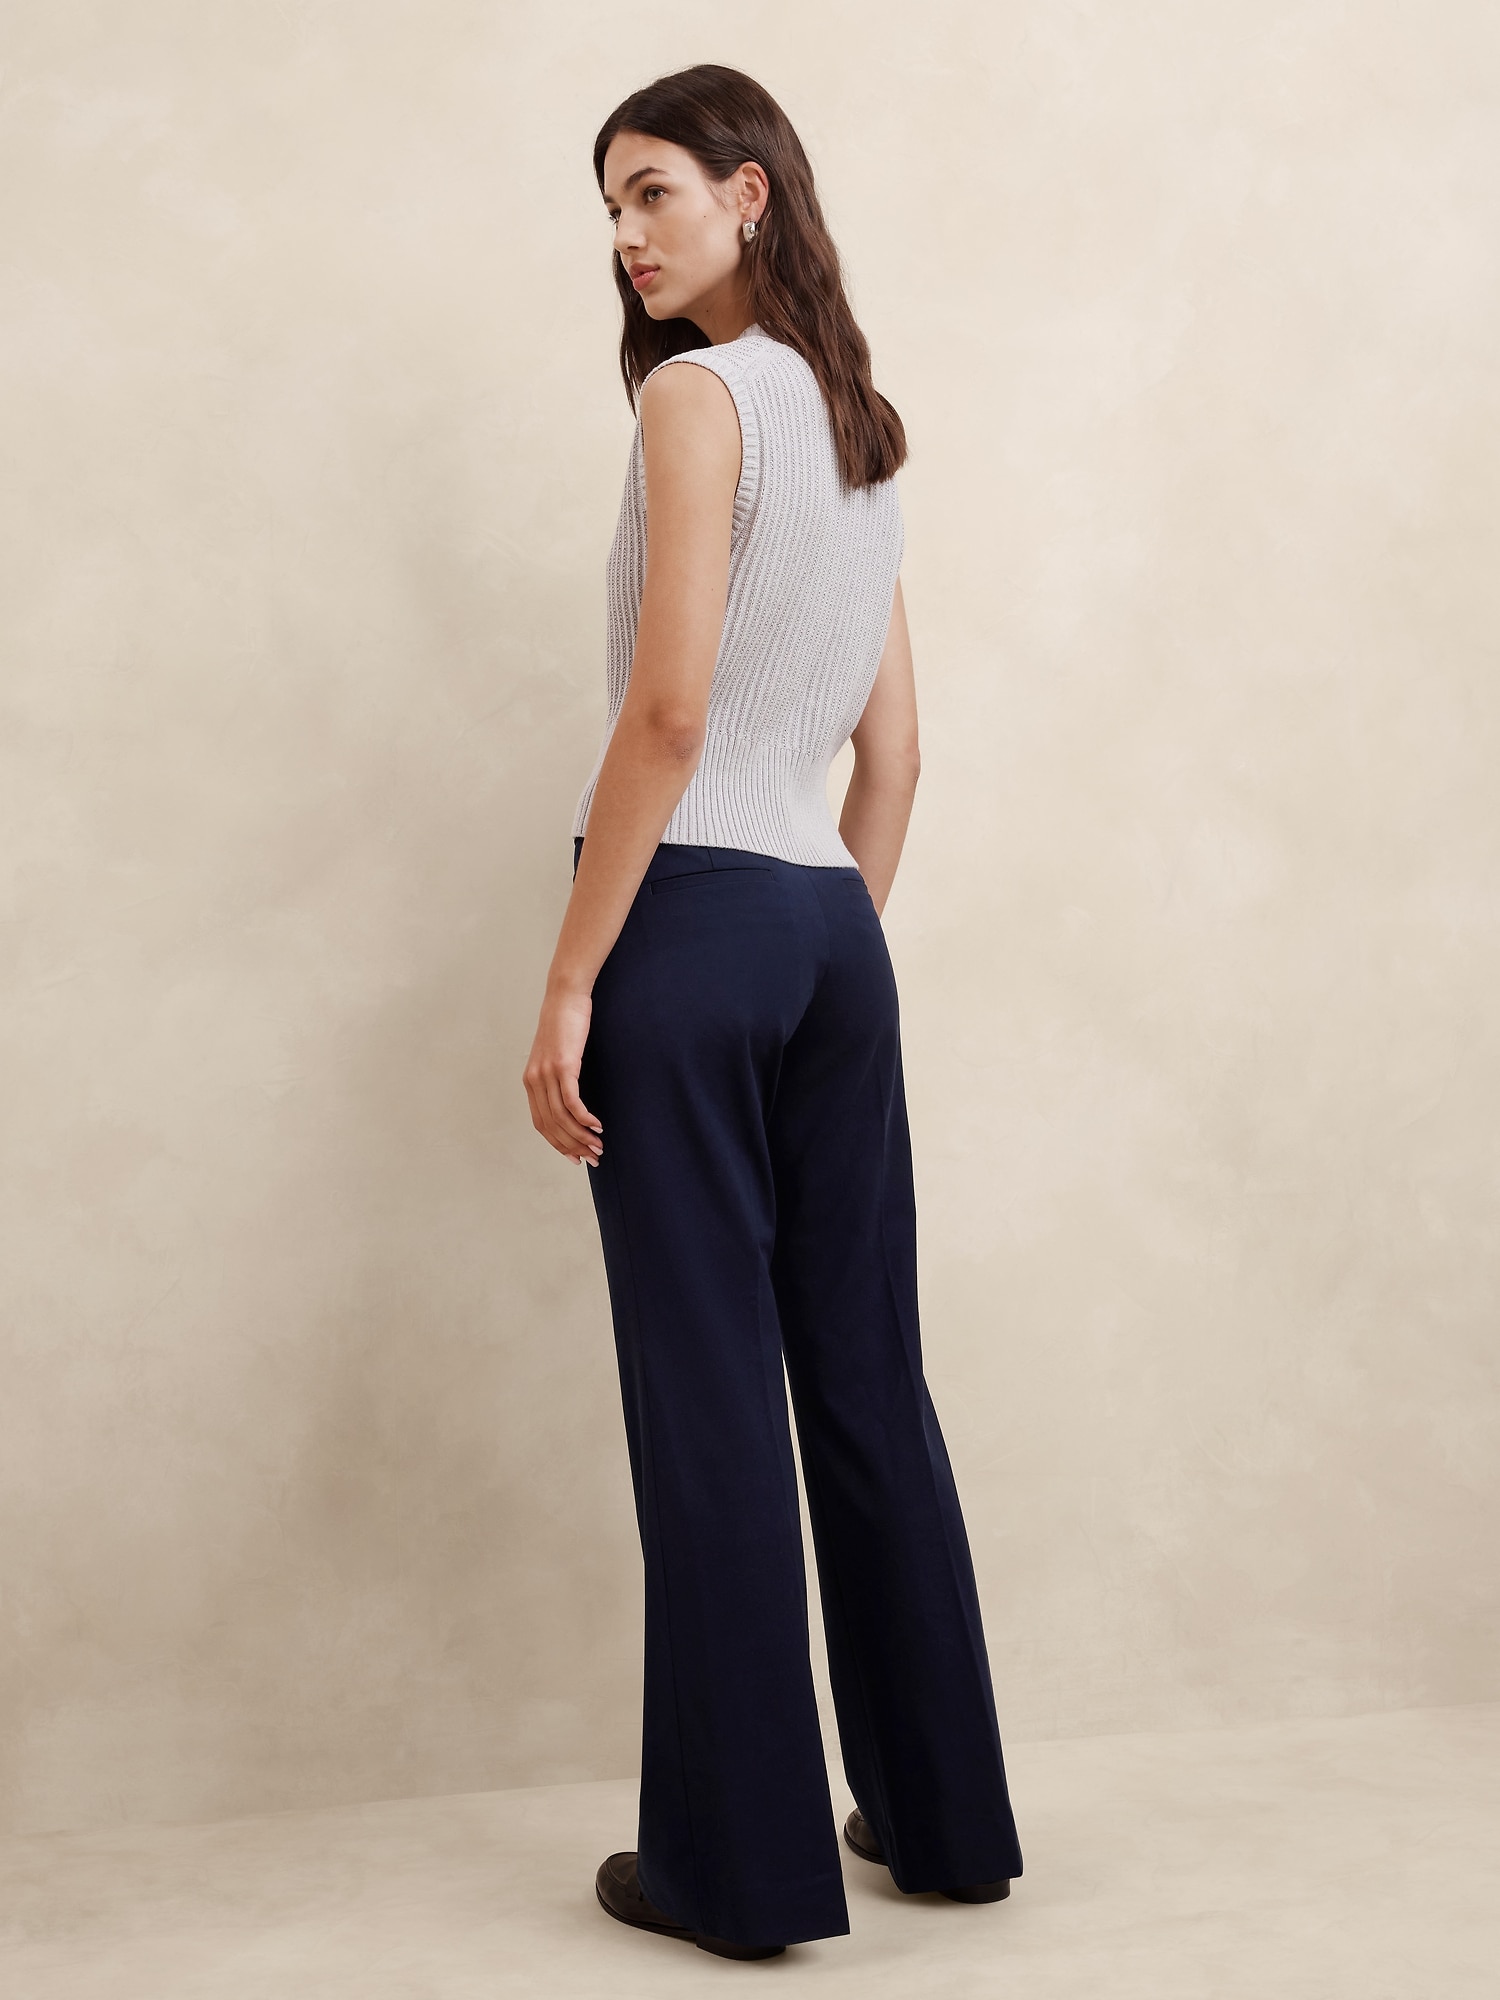 PAVONINE NAVY BLUE Color Karara Fabric Bootcut Trousers For Women -  Pavonine - 4103049